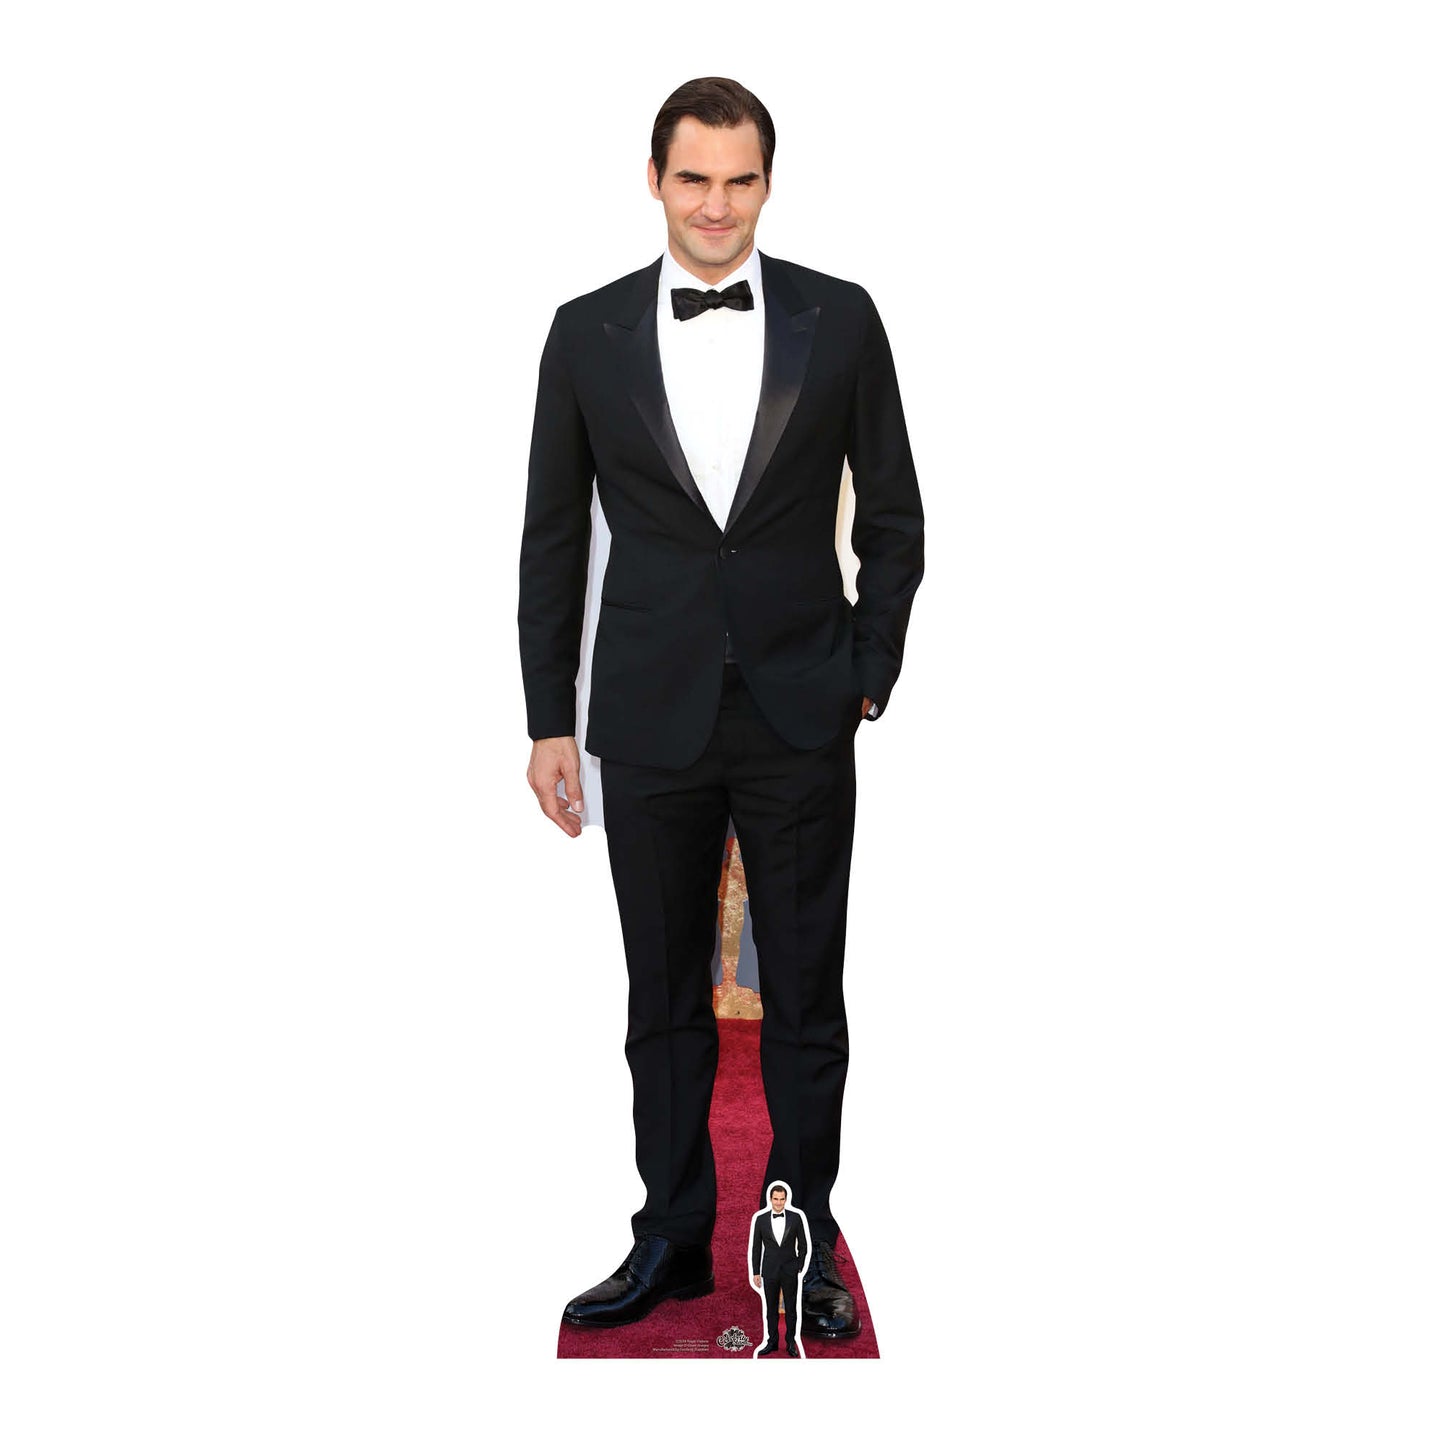 CS674 Roger Federer Height 185cm Lifesize Cardboard Cut Out With Mini